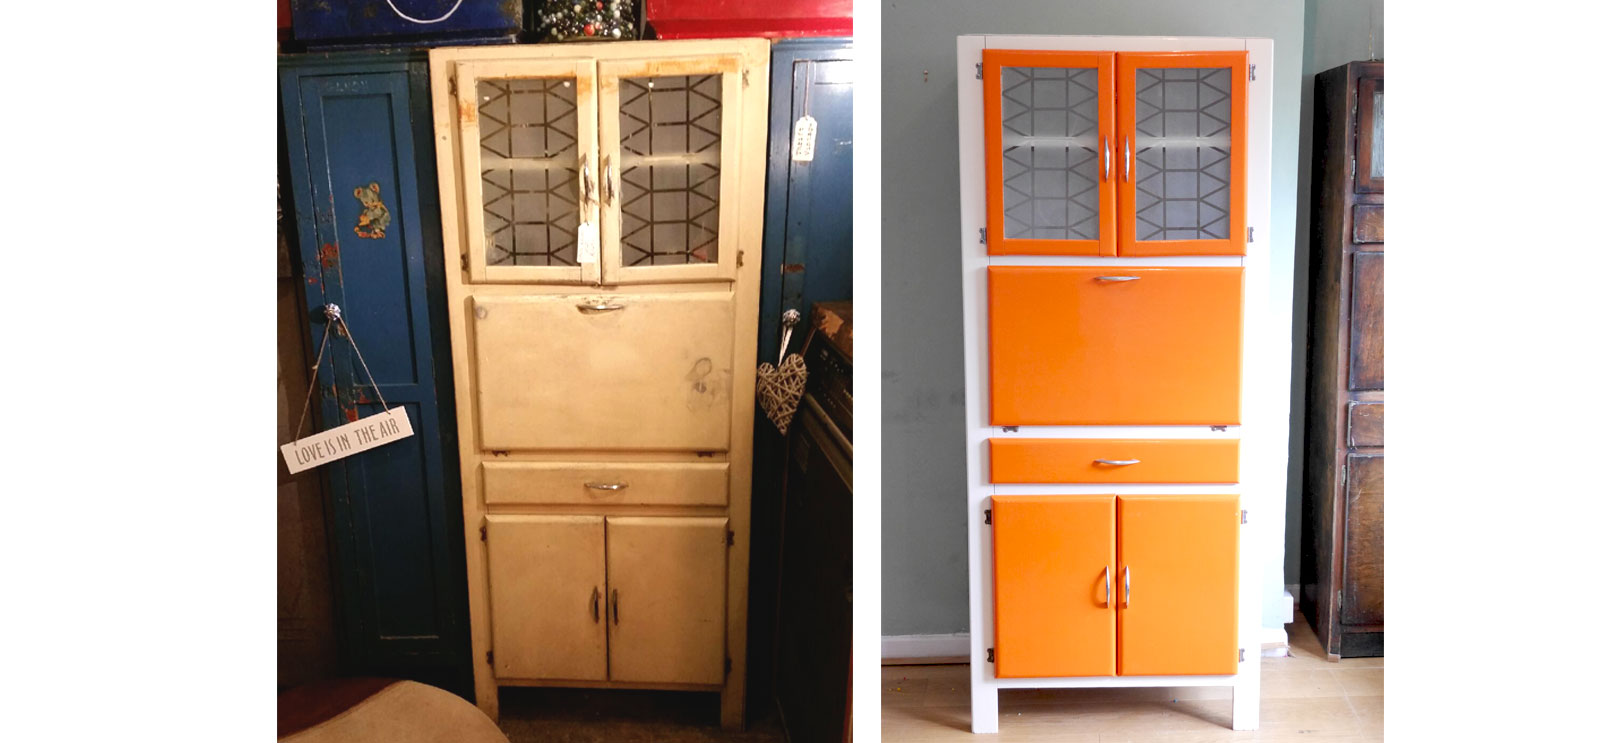 Hoosier cabinet refurb before and after shots